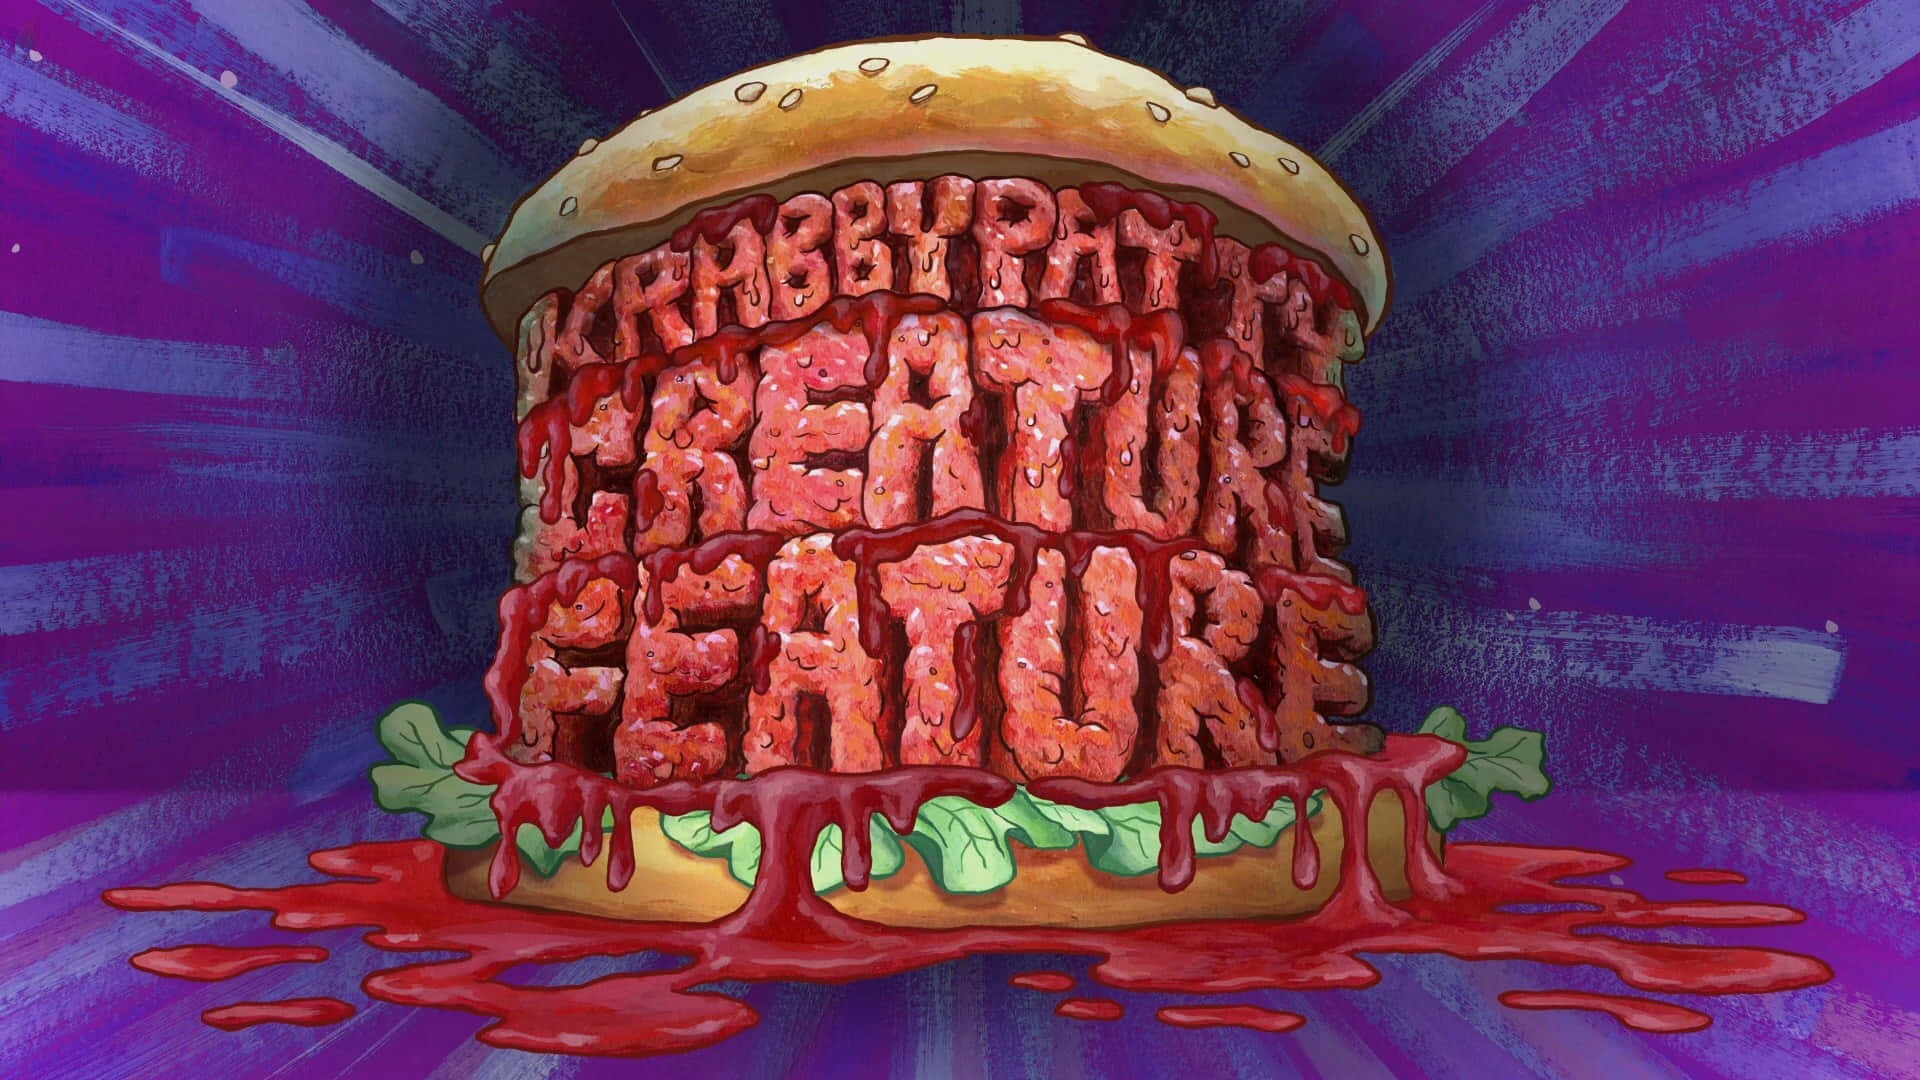 Delectable Krabby Patty on a wooden table Wallpaper